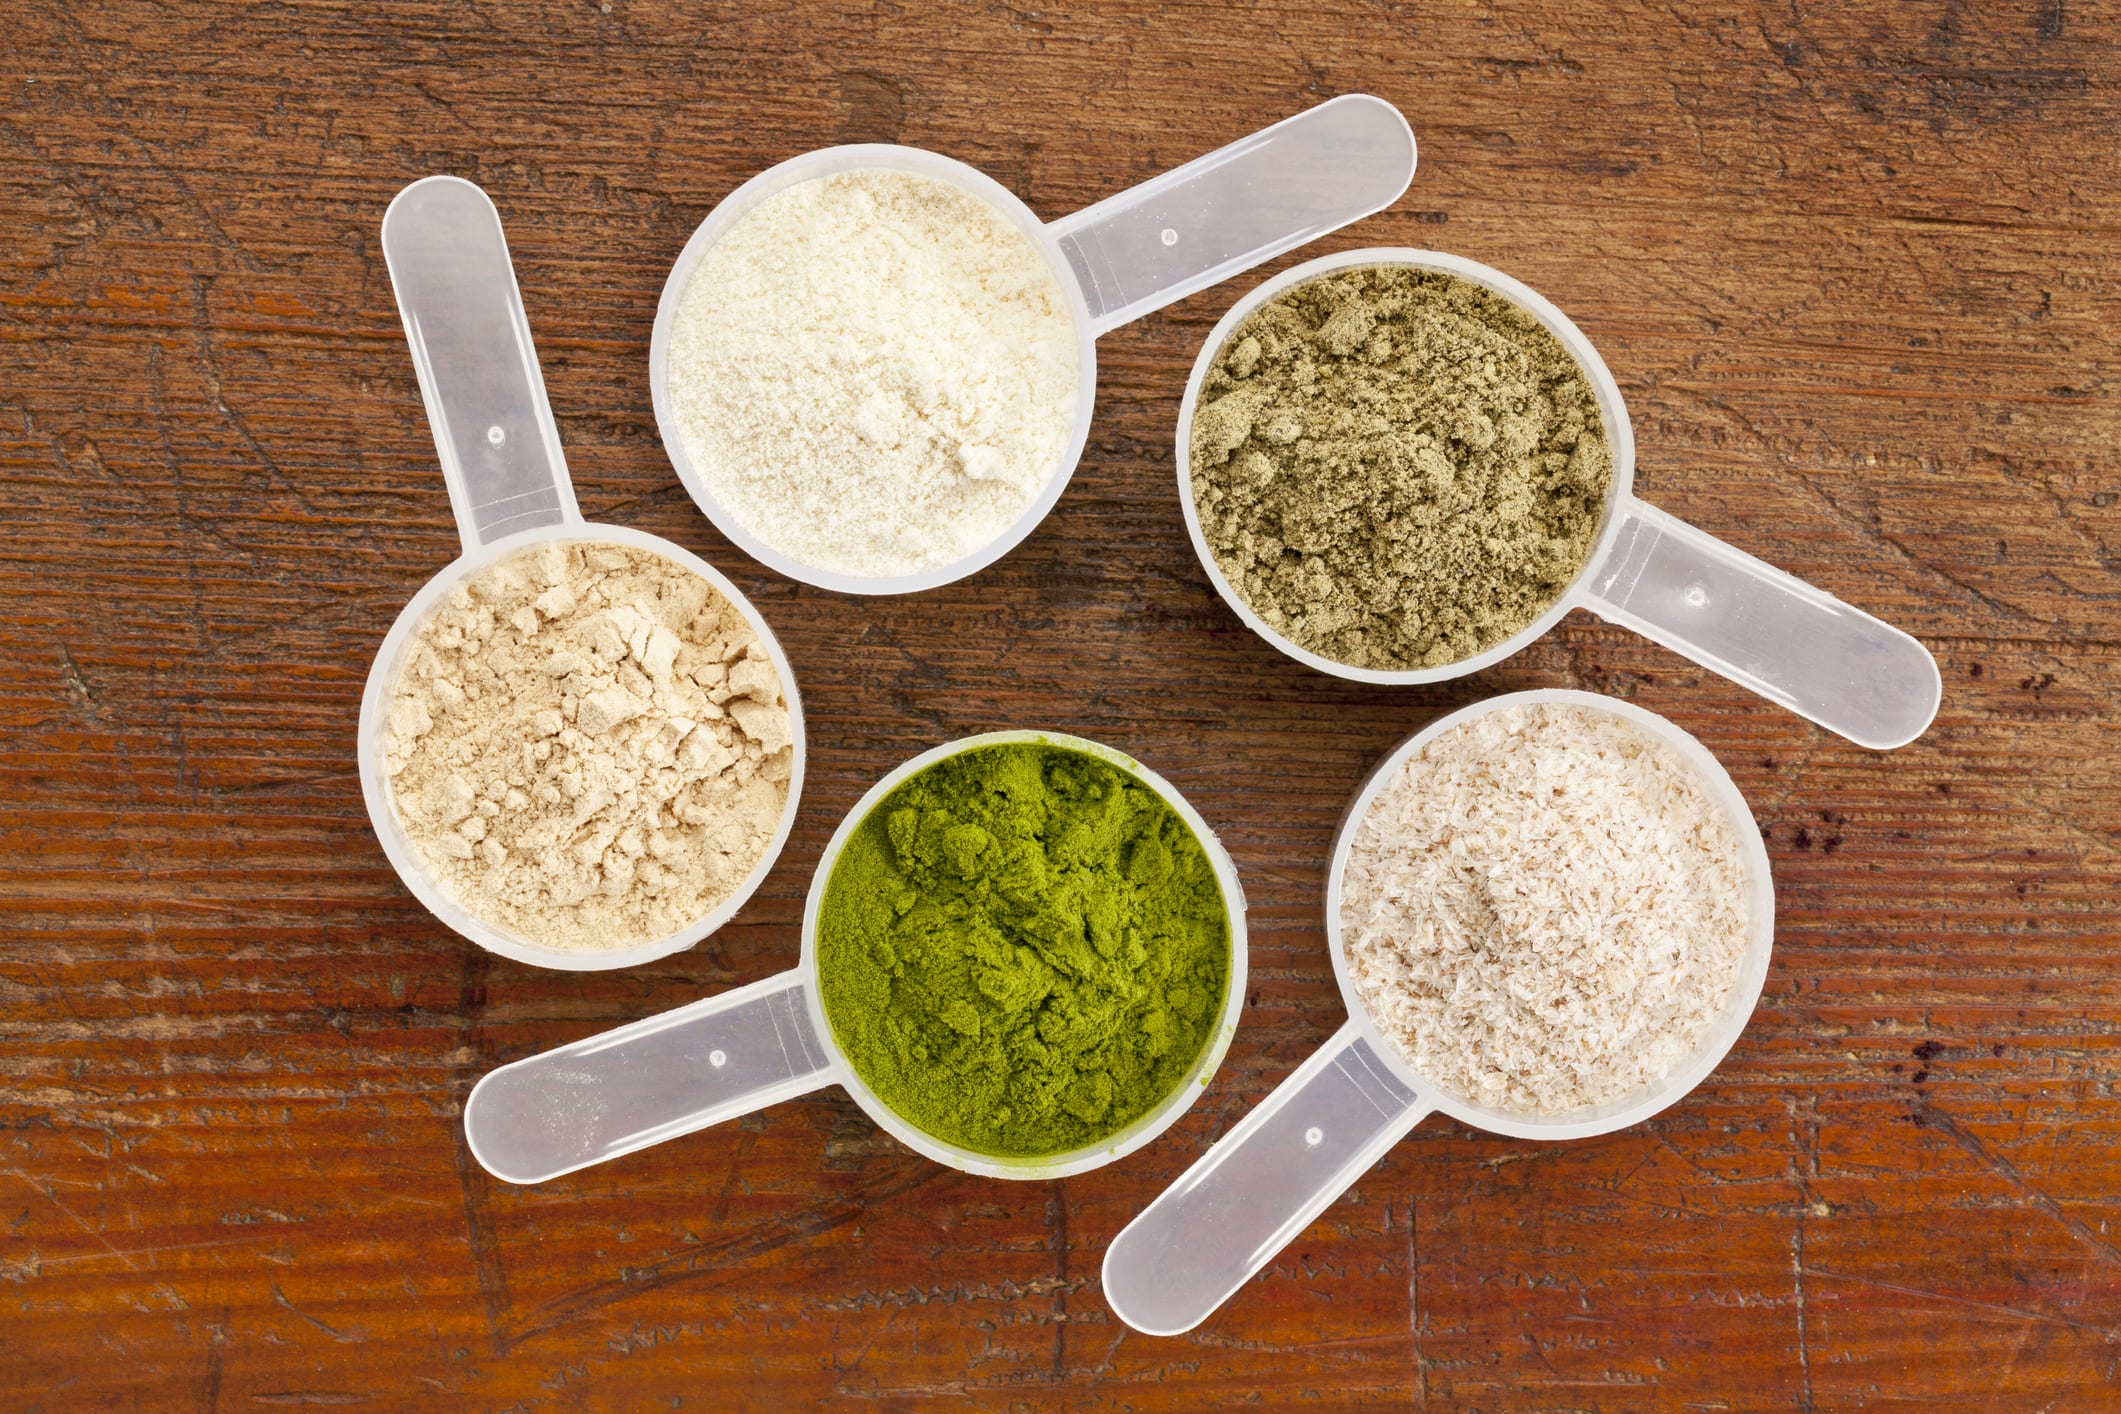 five plastic measuring cups of different superfood supplement powders (form bottom clockwise: wheatgrass, maca root, whey protein, hemp seed protein, psyllium husk) on grunge wood background